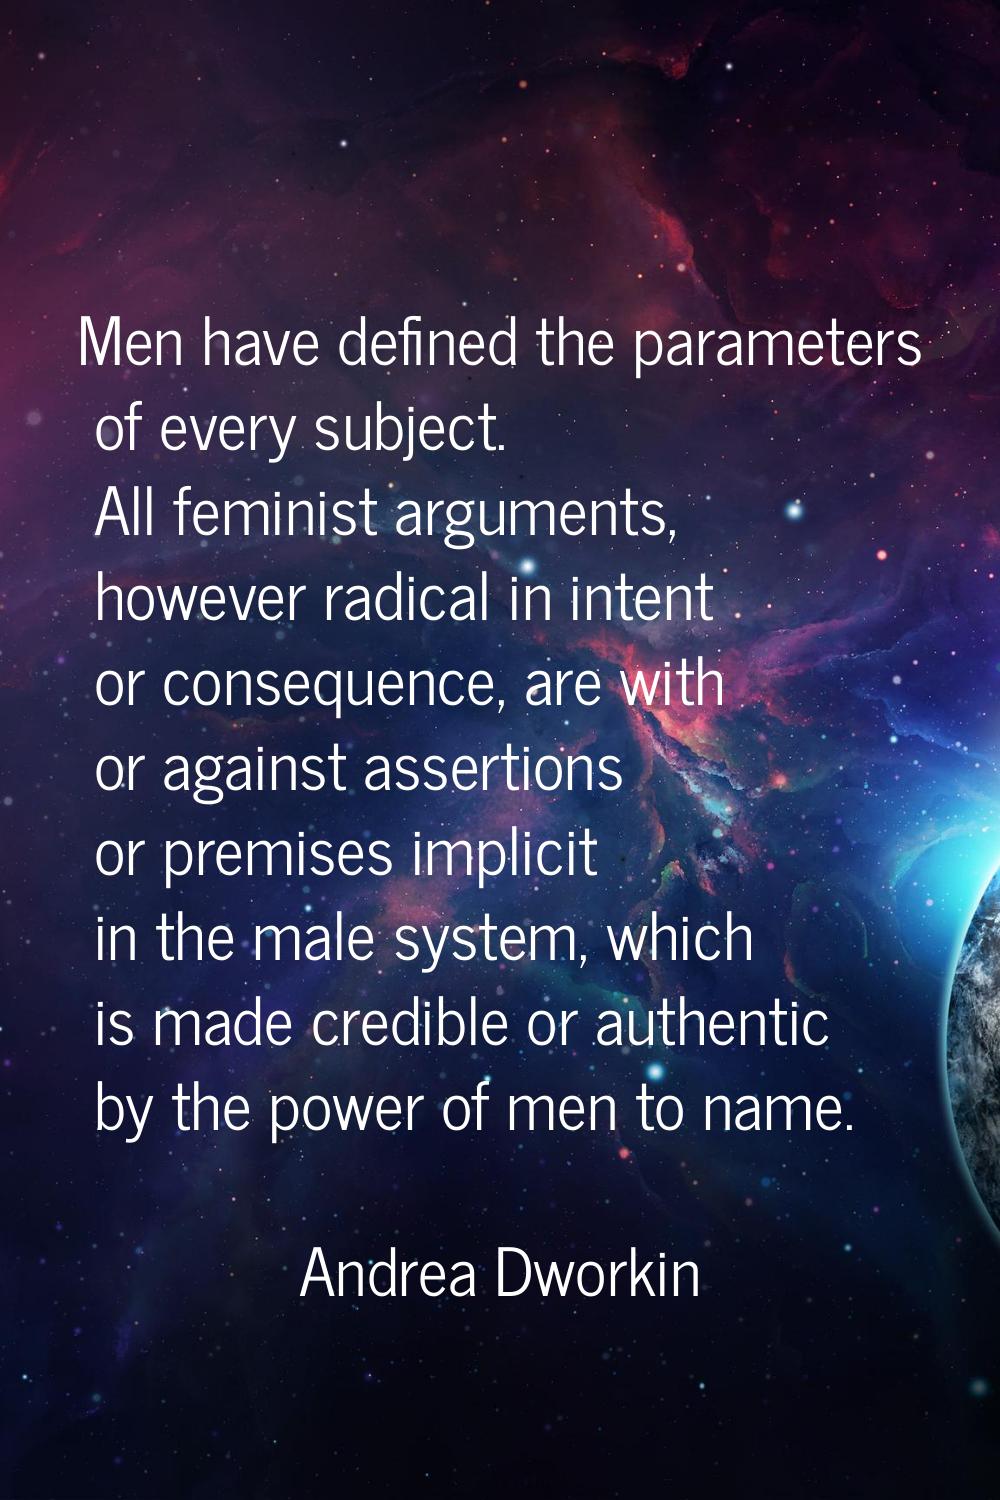 Men have defined the parameters of every subject. All feminist arguments, however radical in intent